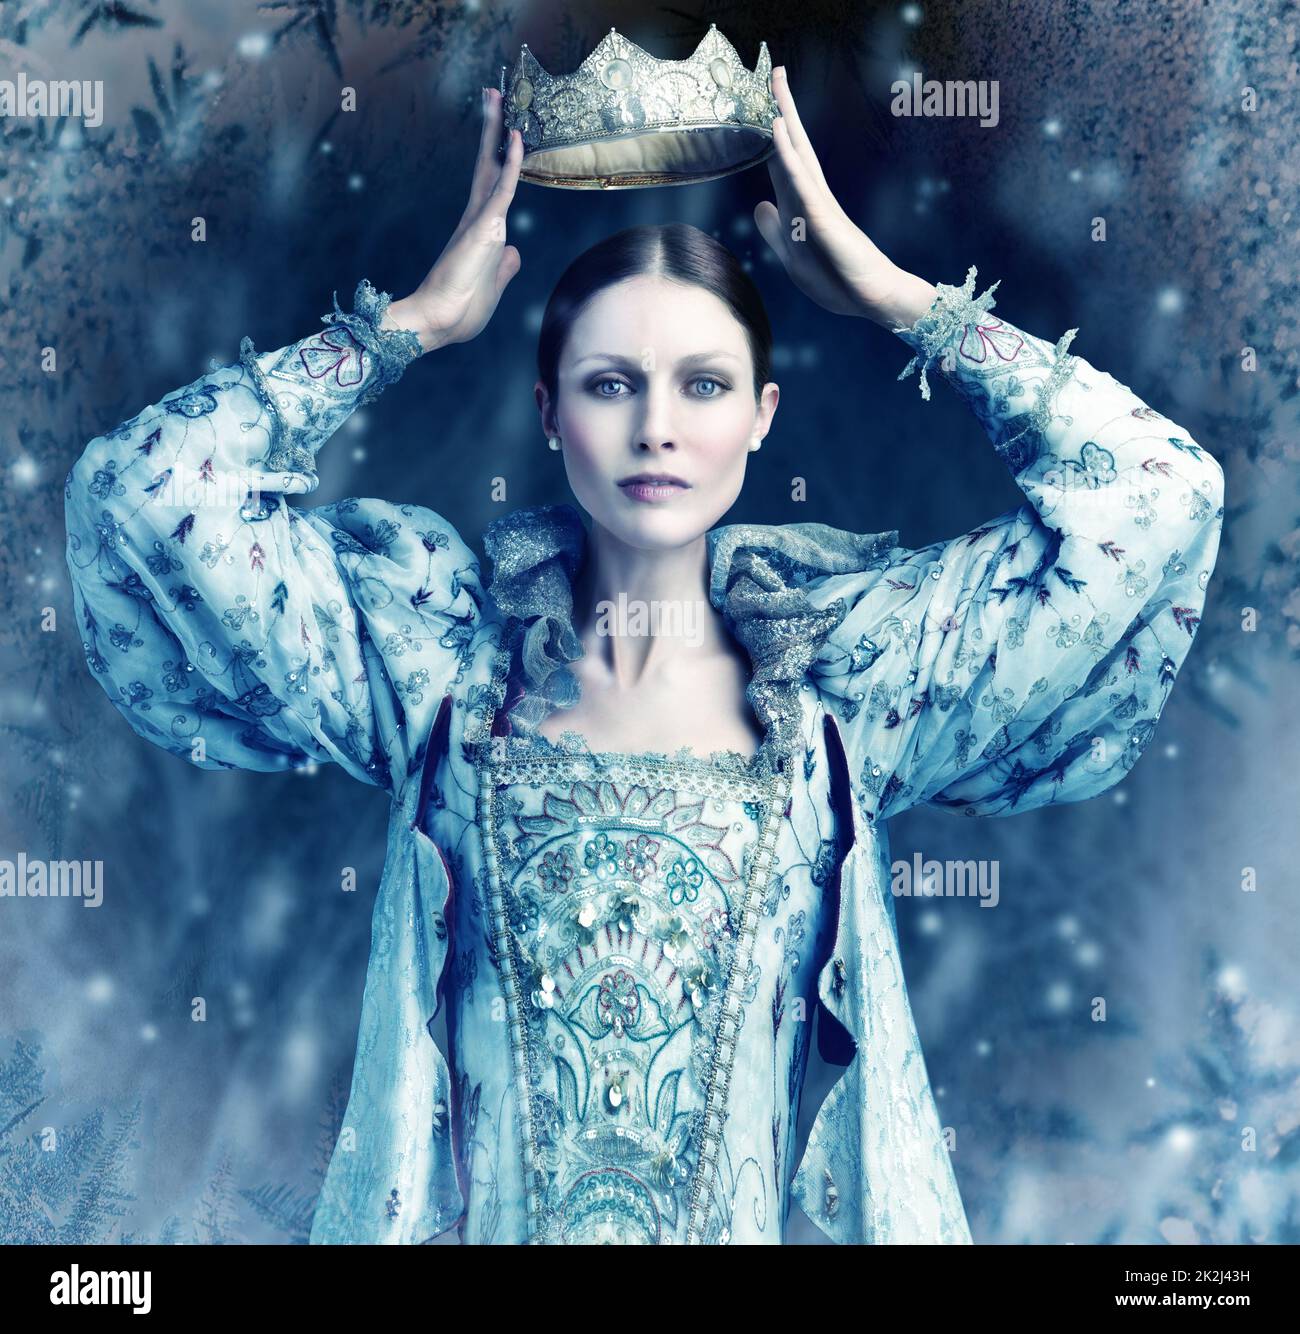 The ice queen cometh. Shot of queen holding a crown over her head with snow falling around her. Stock Photo